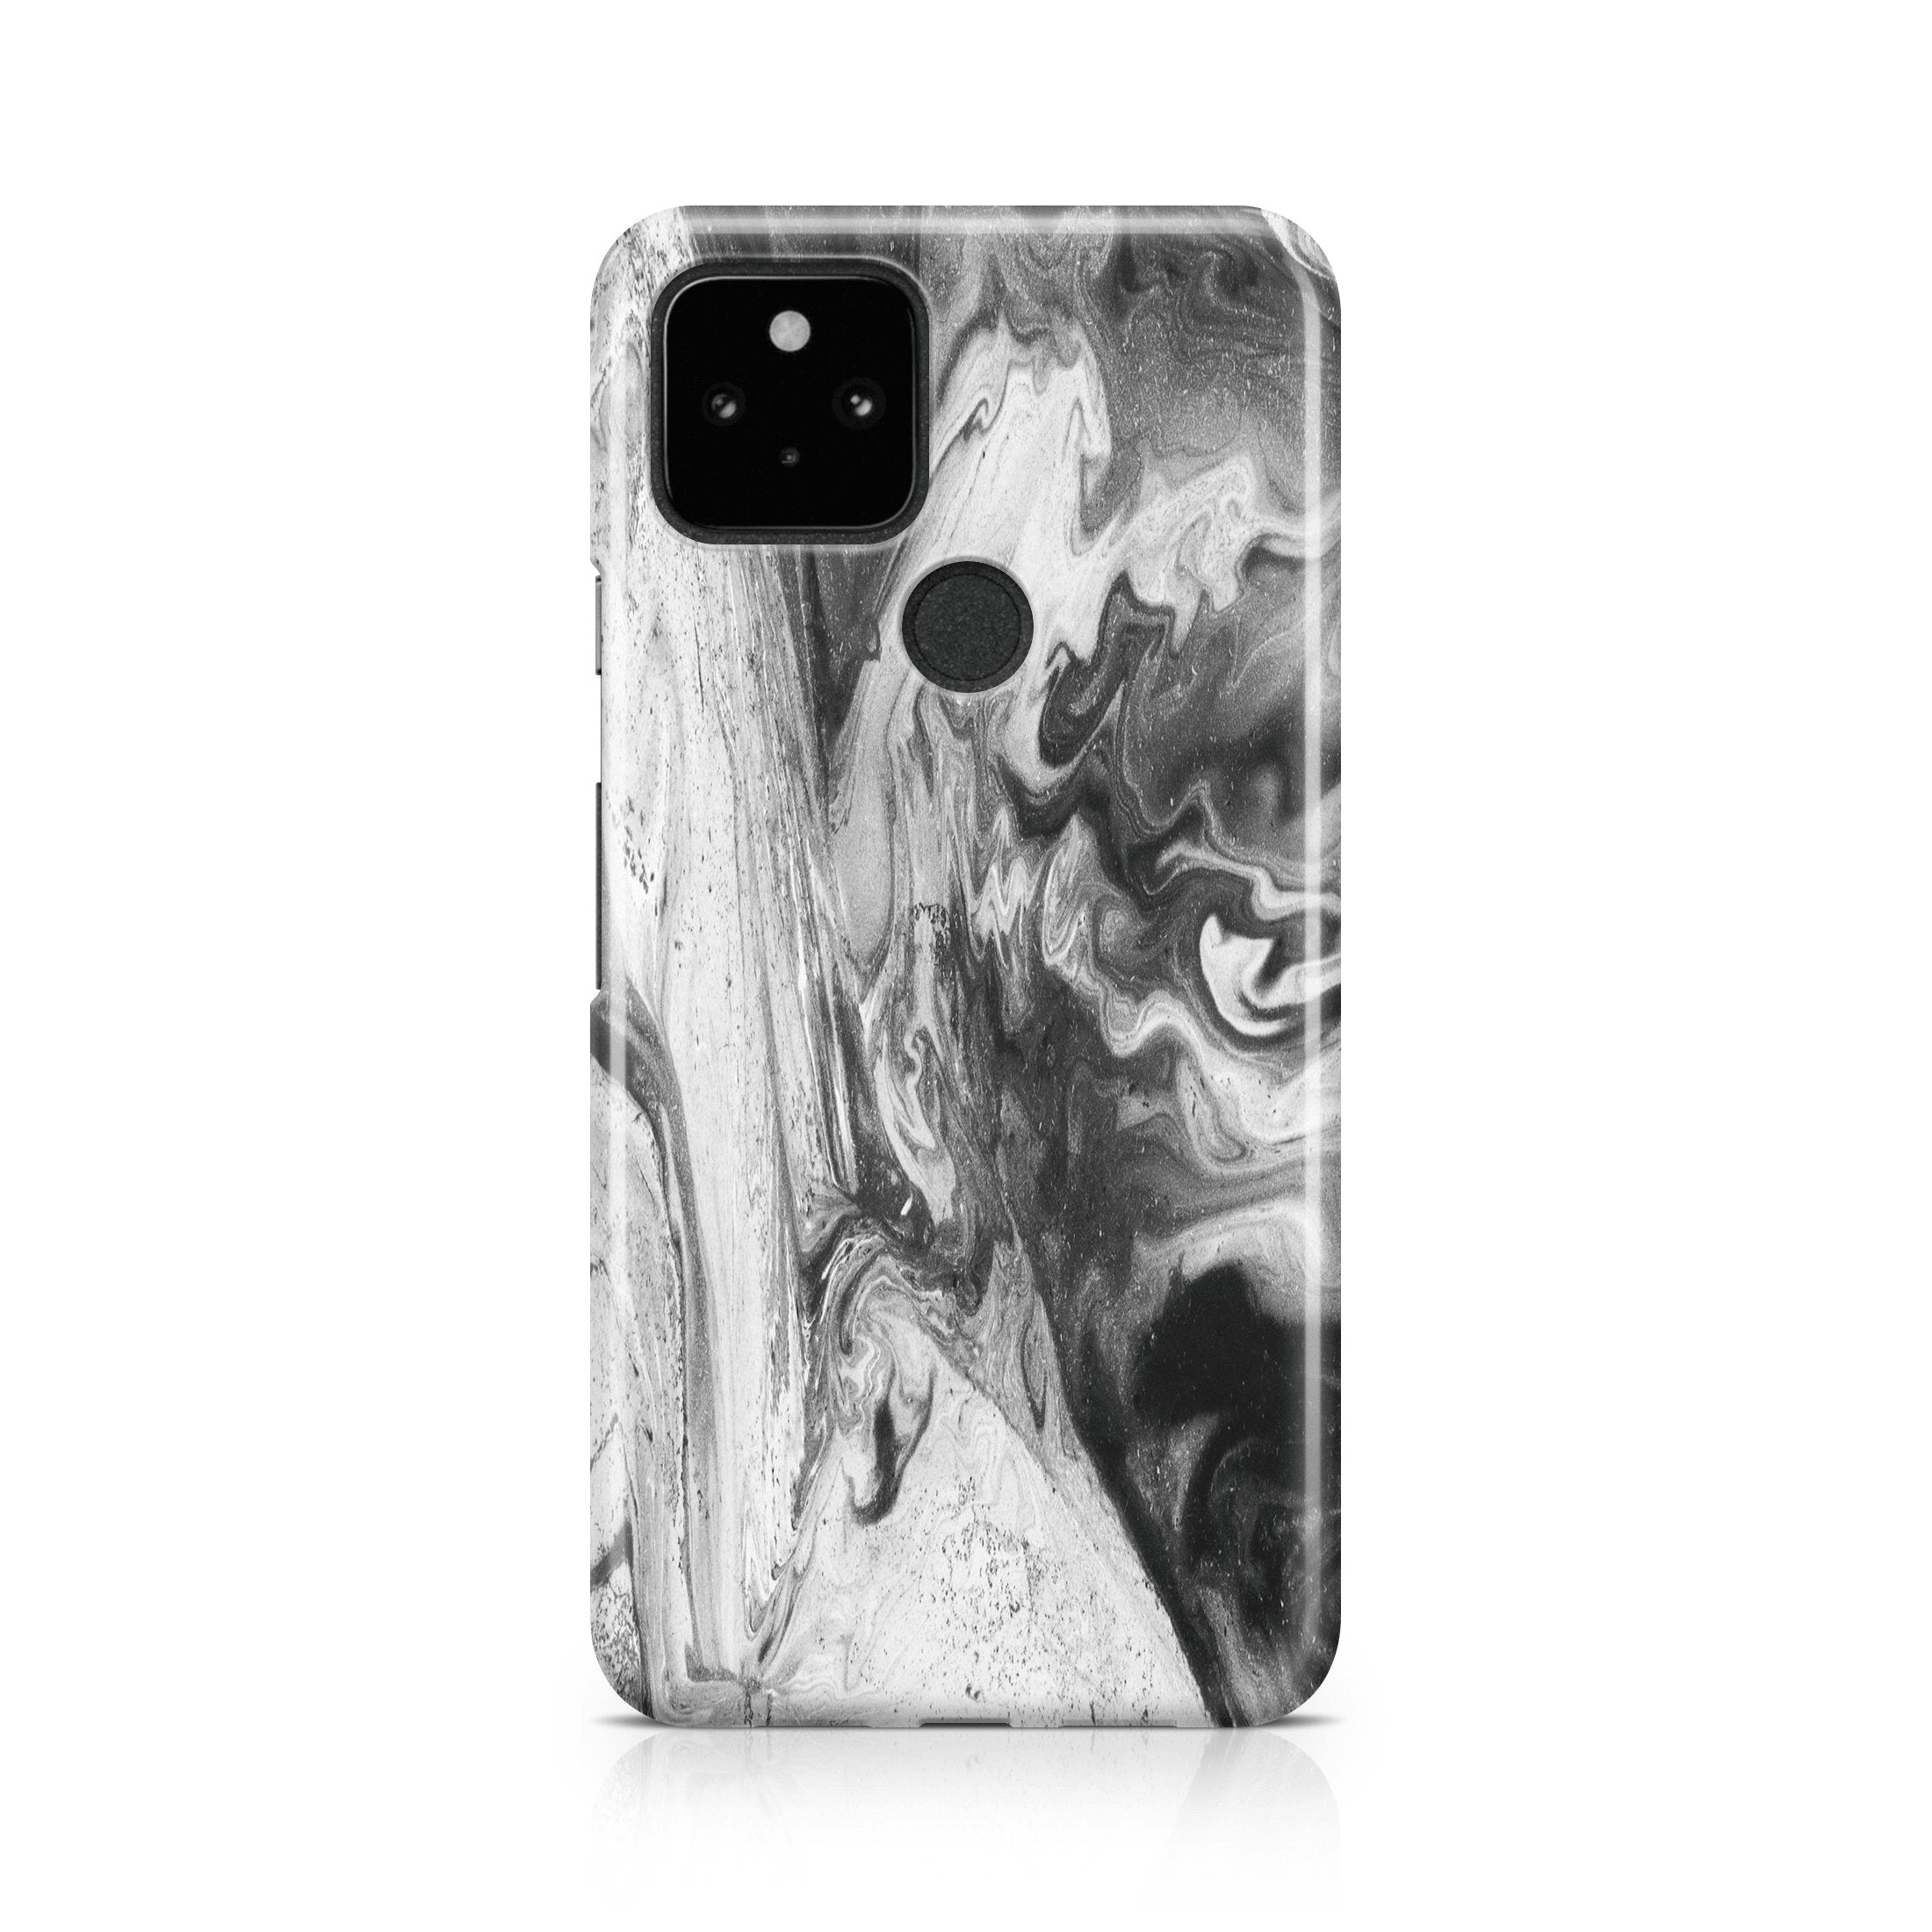 Black & White Marble Series I - Google phone case designs by CaseSwagger